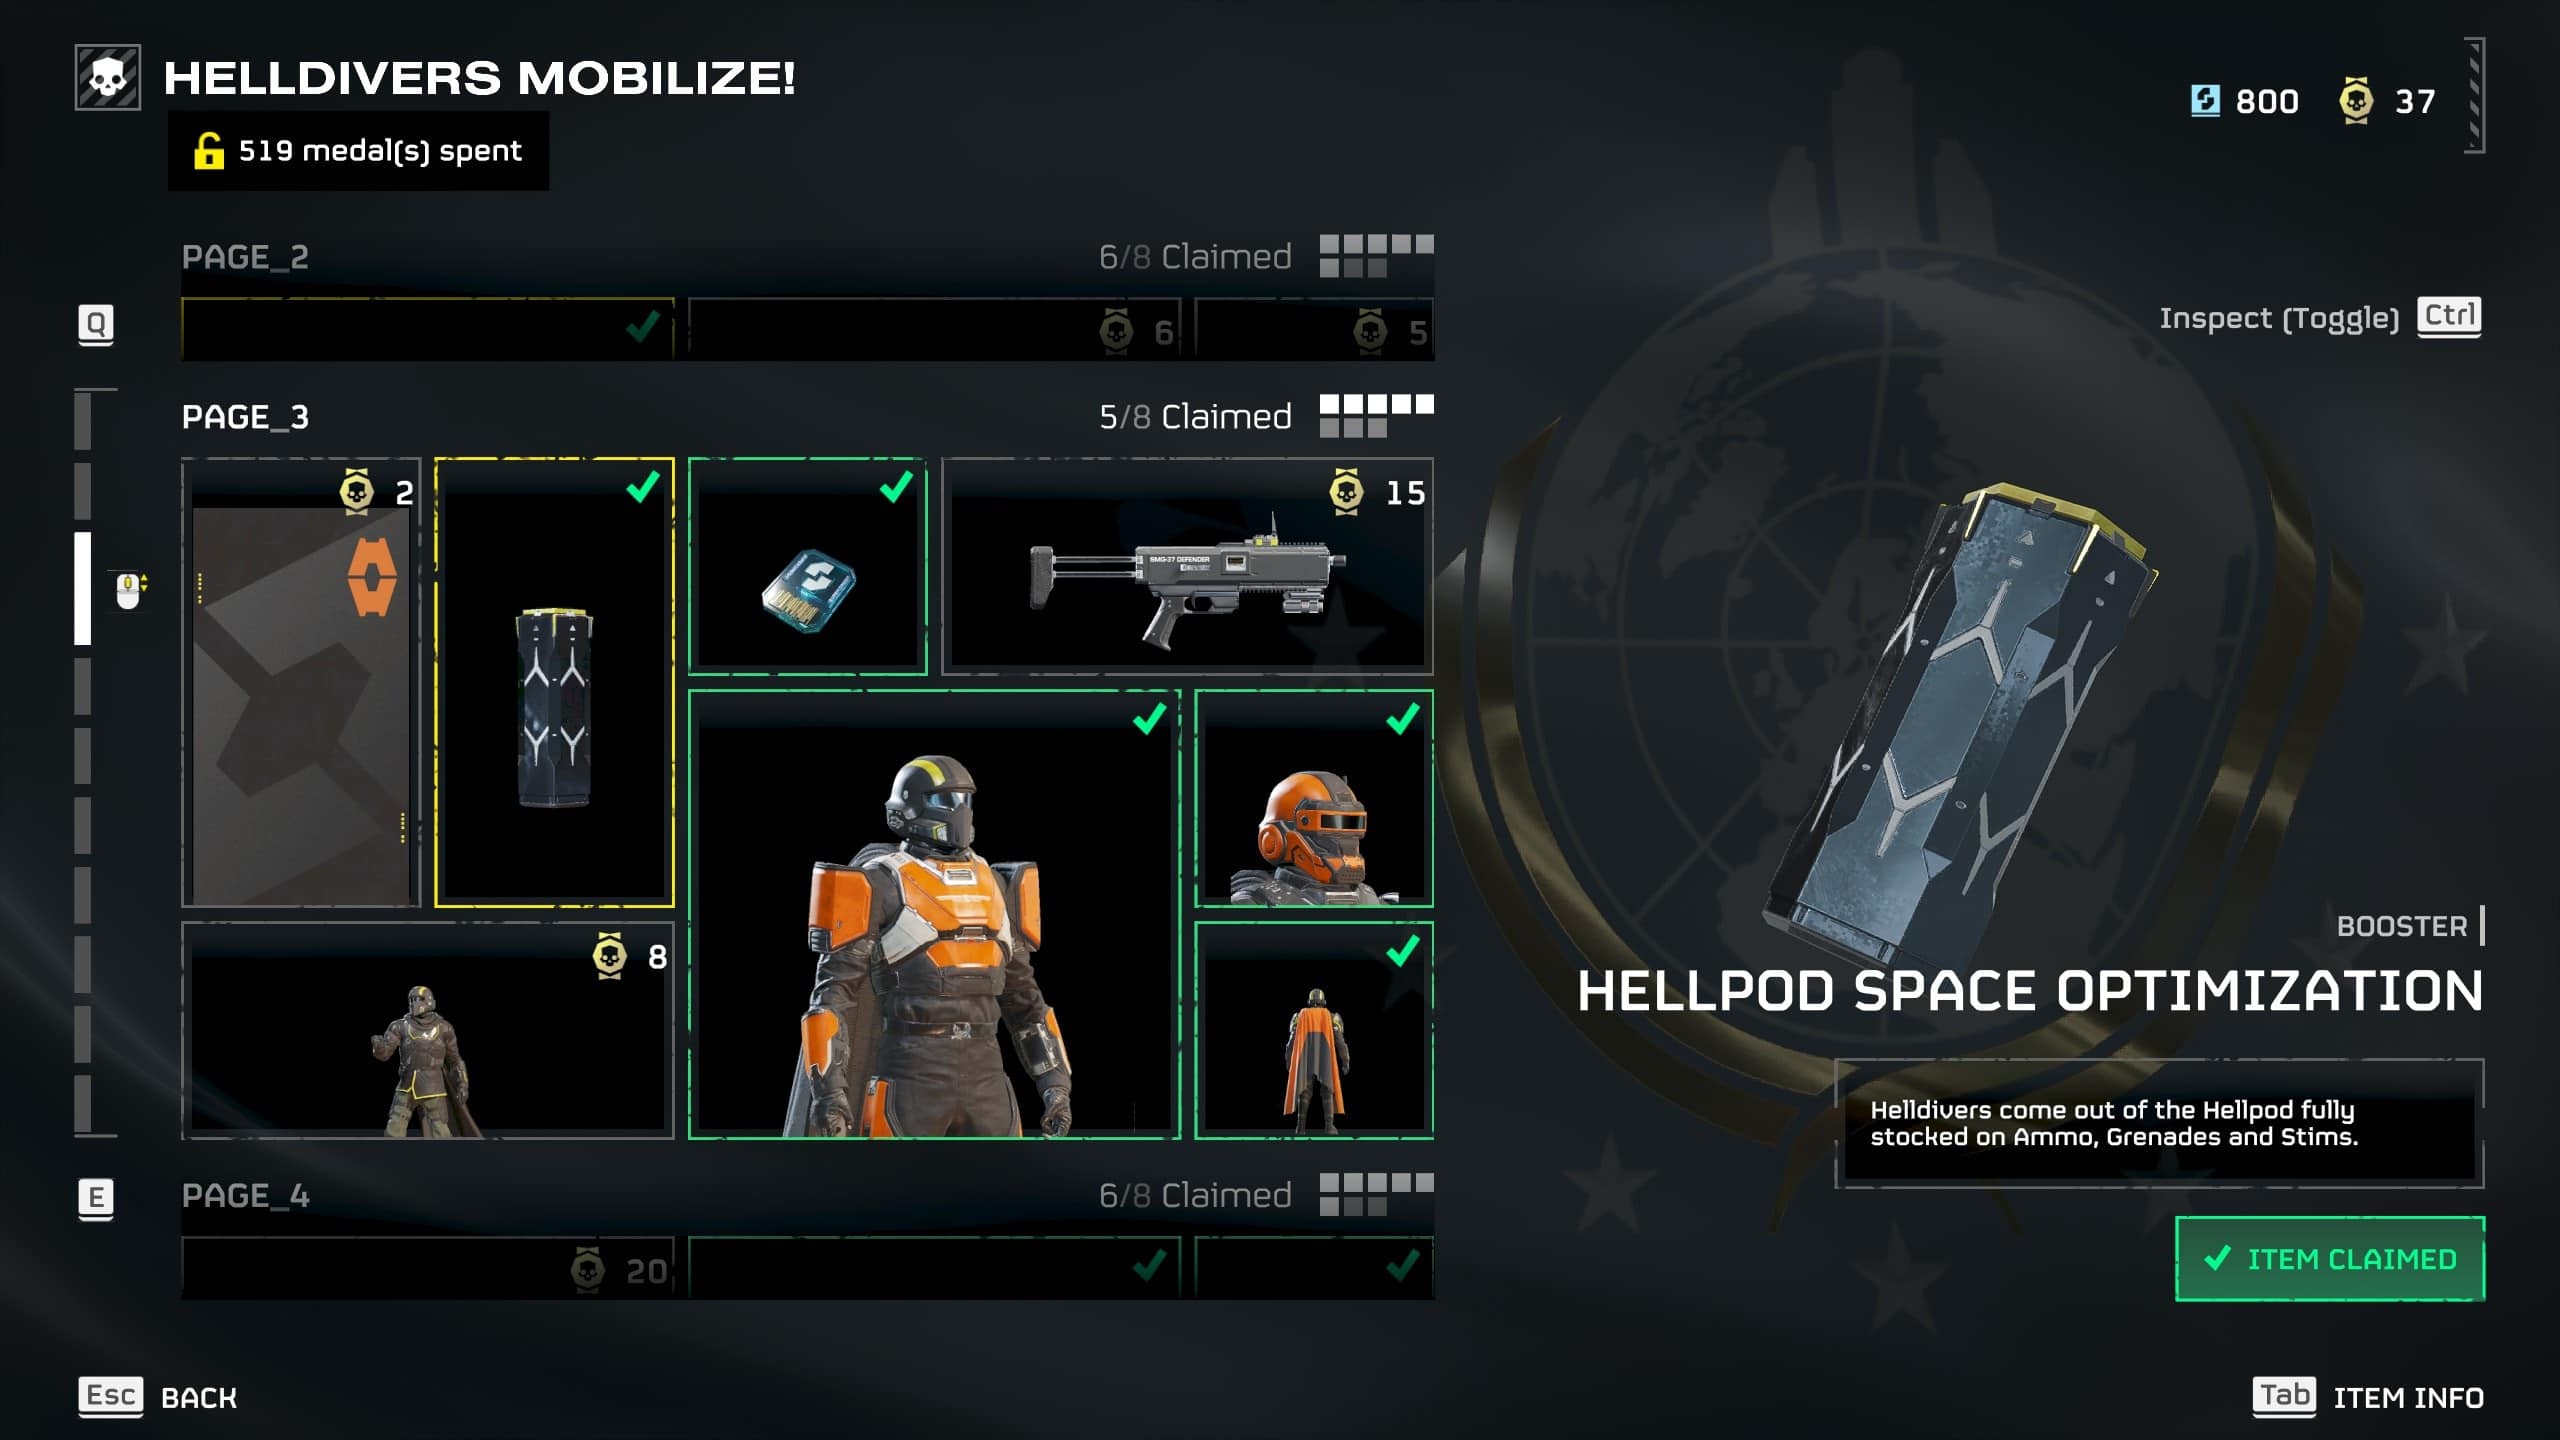 Helldivers 2 best boosters: The Hellpod Space Optimization booster in the game. Image captured by VideoGamer.